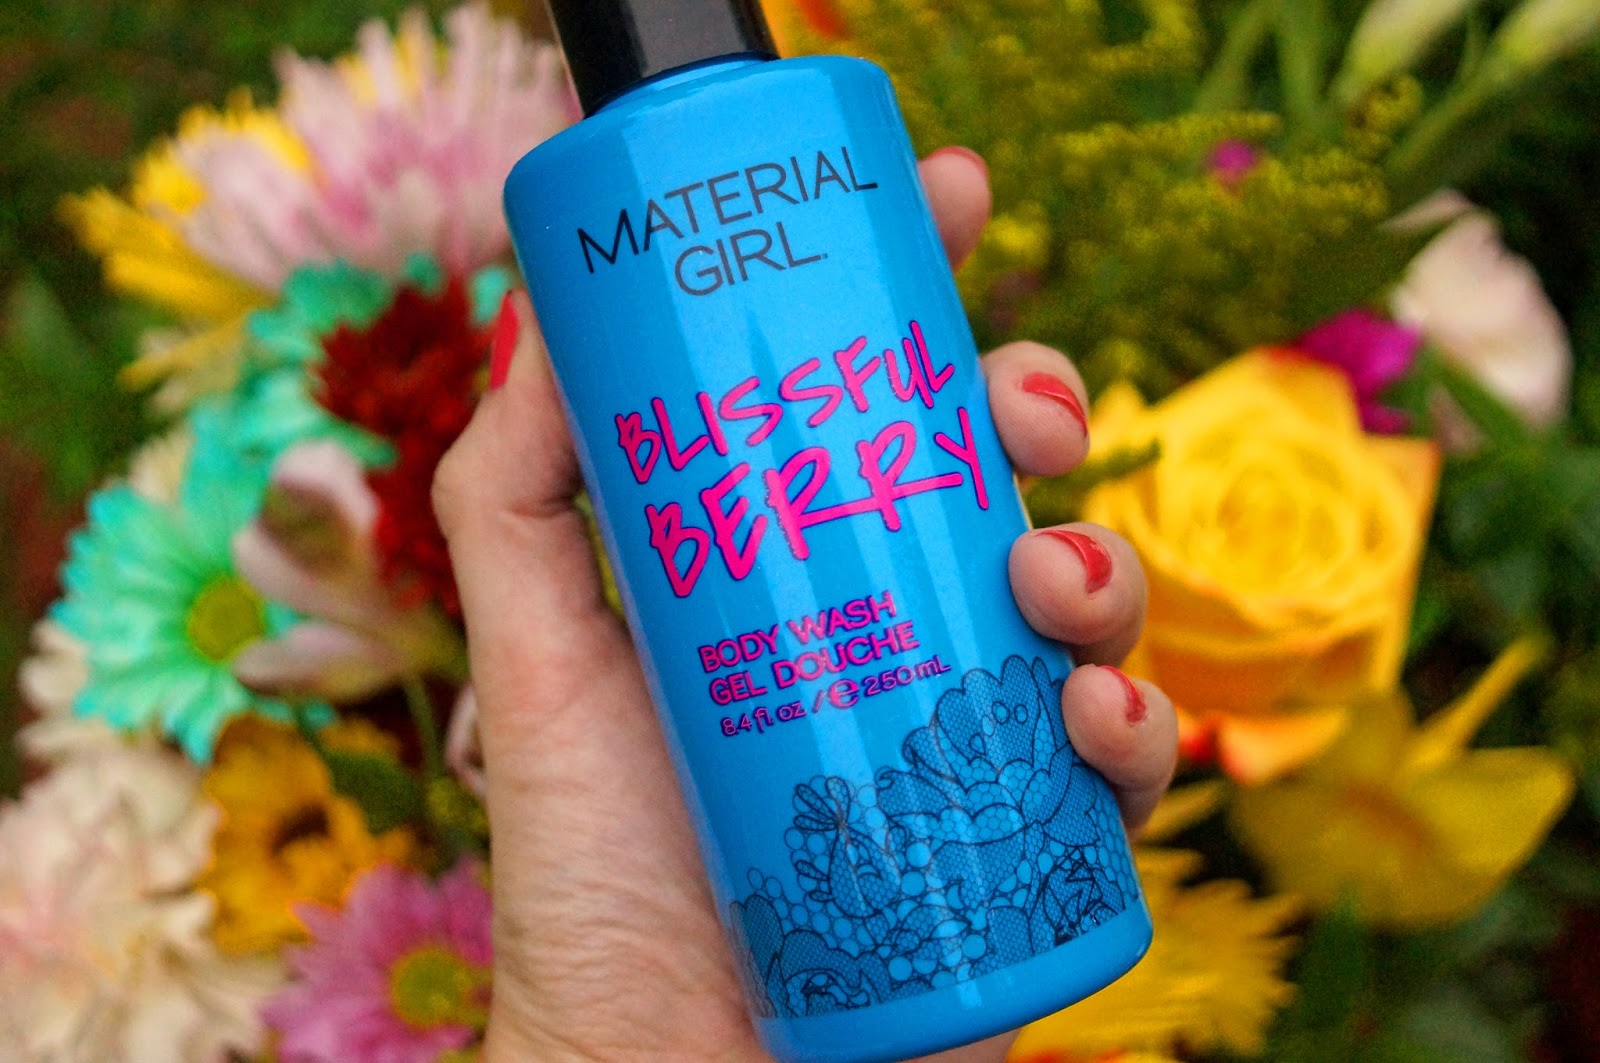 This Body Wash by Material Girl smells like flowers!!